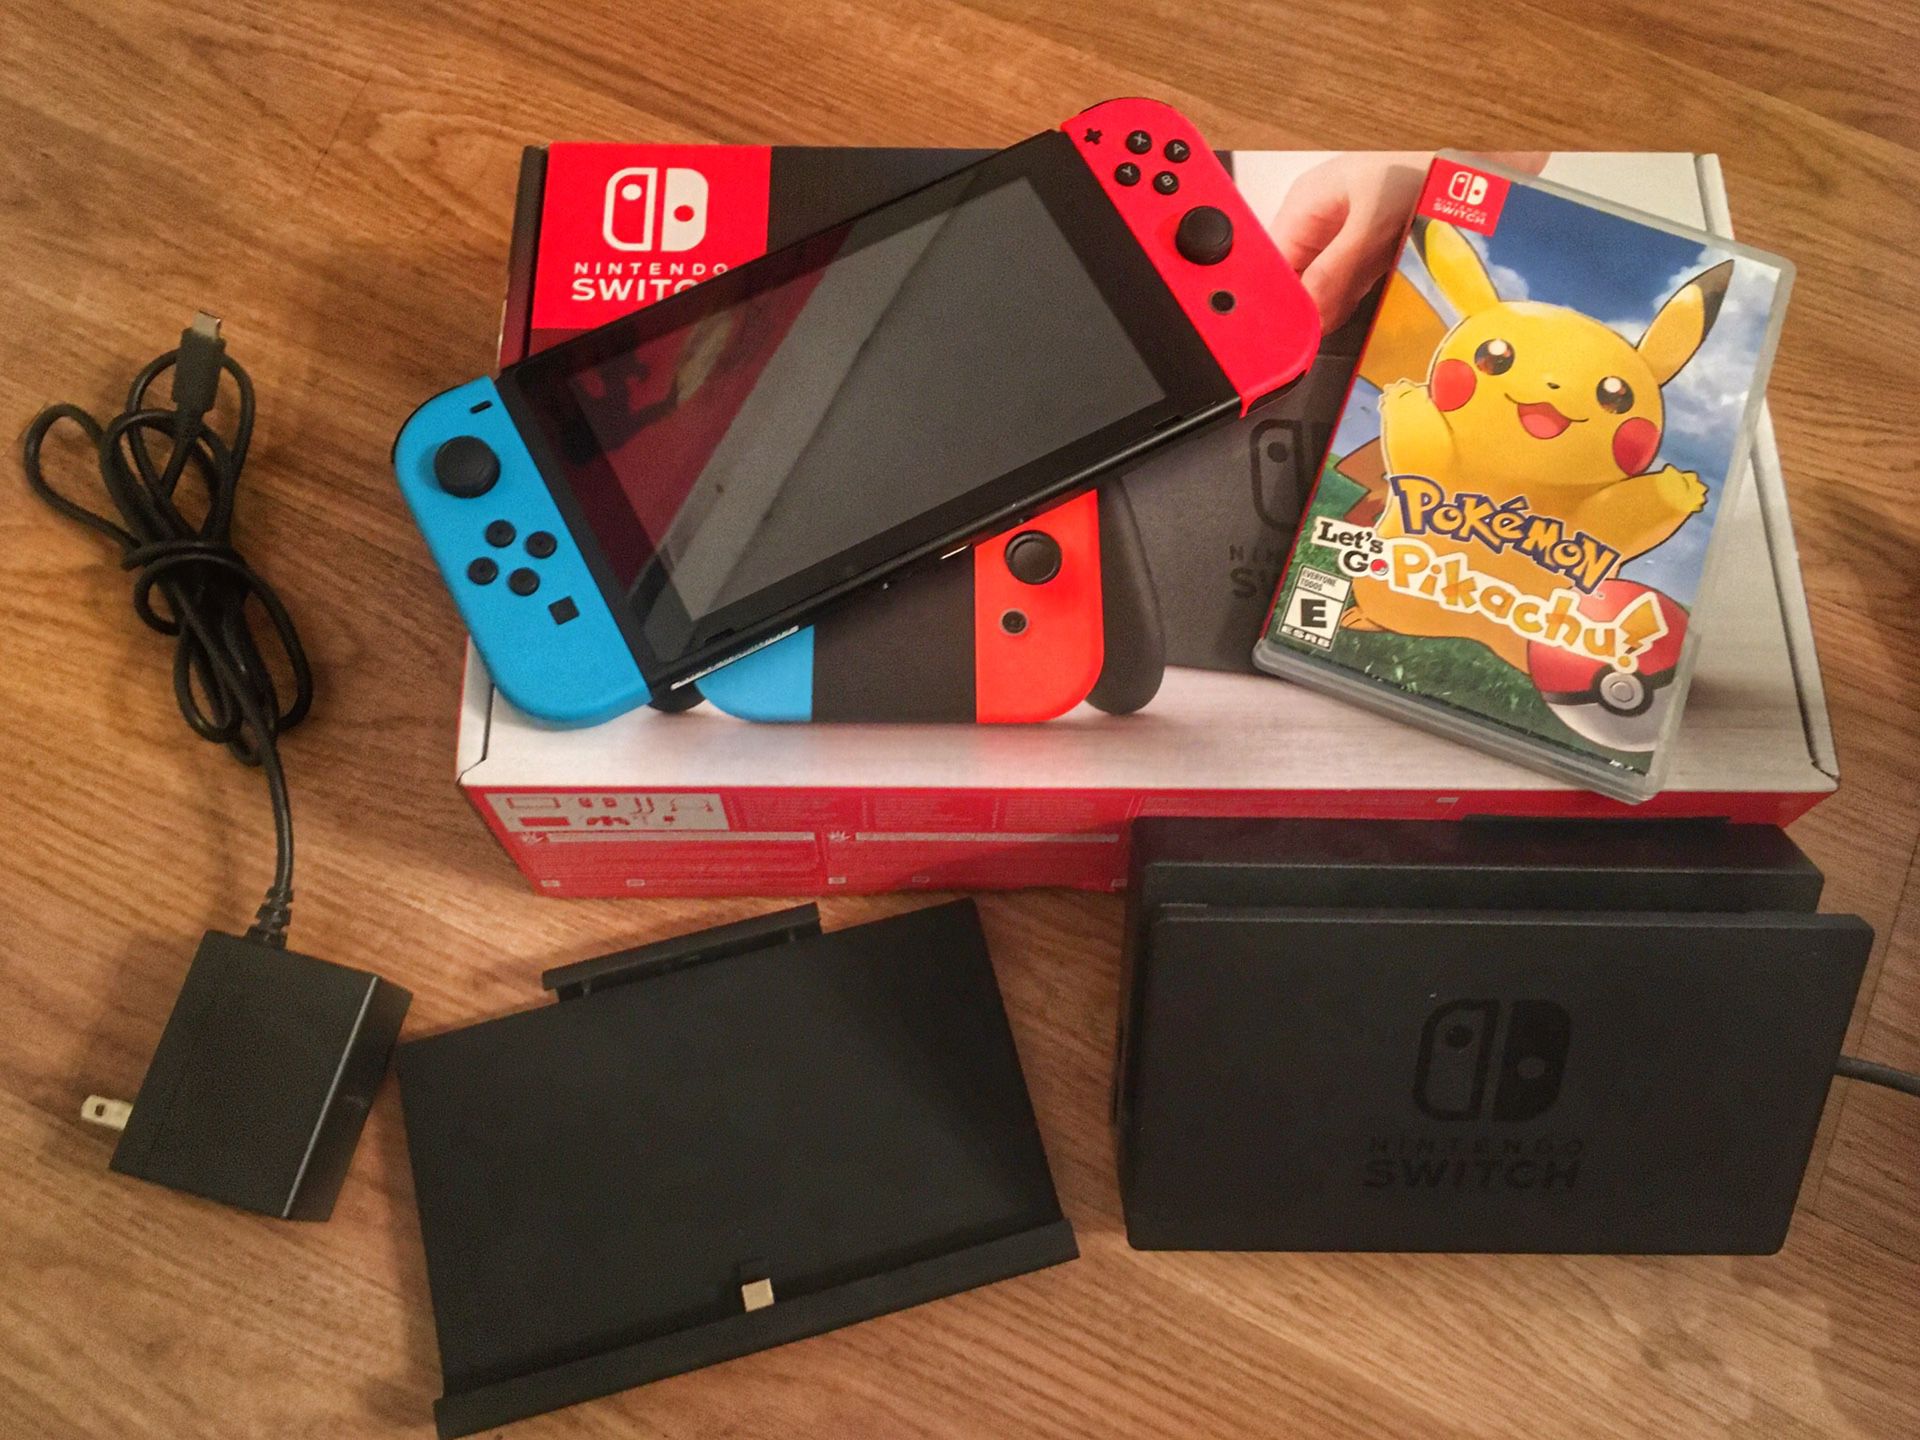 Nintendo switch. $250 FIRM!! No trading or lowers